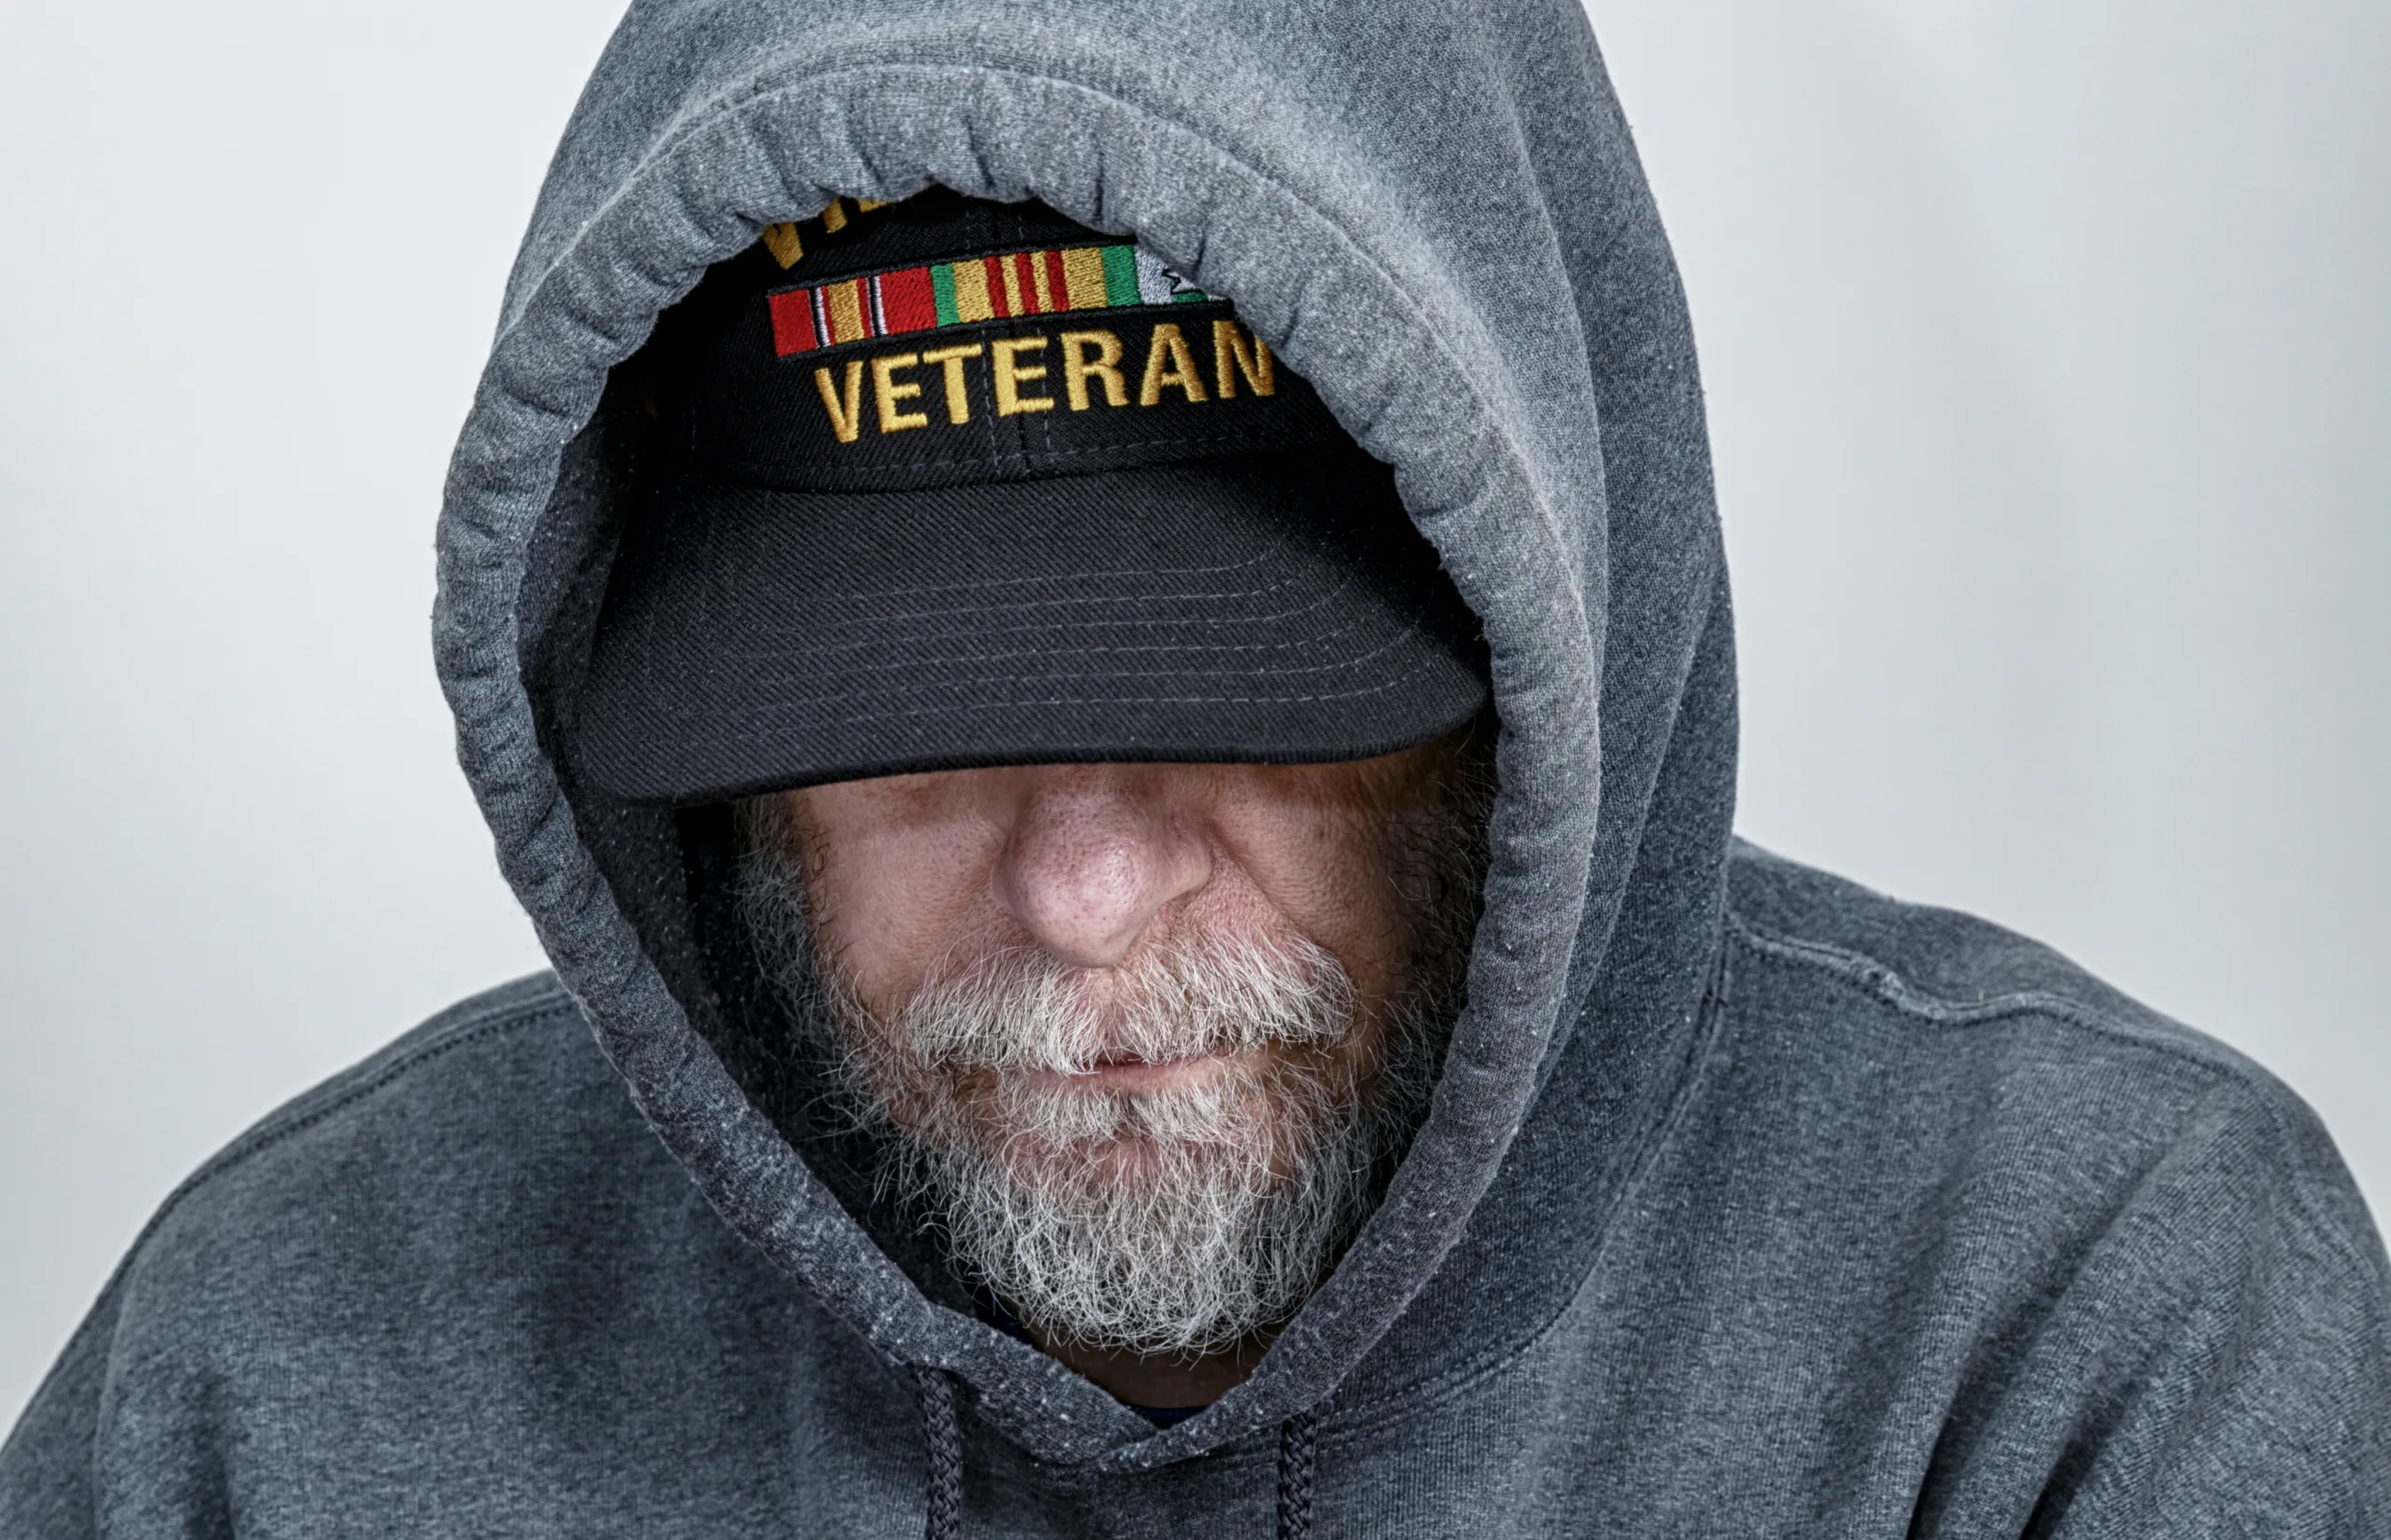 A Vietnam War USA military veteran is looking down with his partially obscured face showing a serious facial expression. Though this shot is posed, this is a real life, real person Vietnam war veteran who's recently had some significant health issues. He is wearing an inexpensive, non-branded, generic, souvenir shop replica Vietnam veteran commemorative baseball hat style cap under his hoody sweatshirt hood.